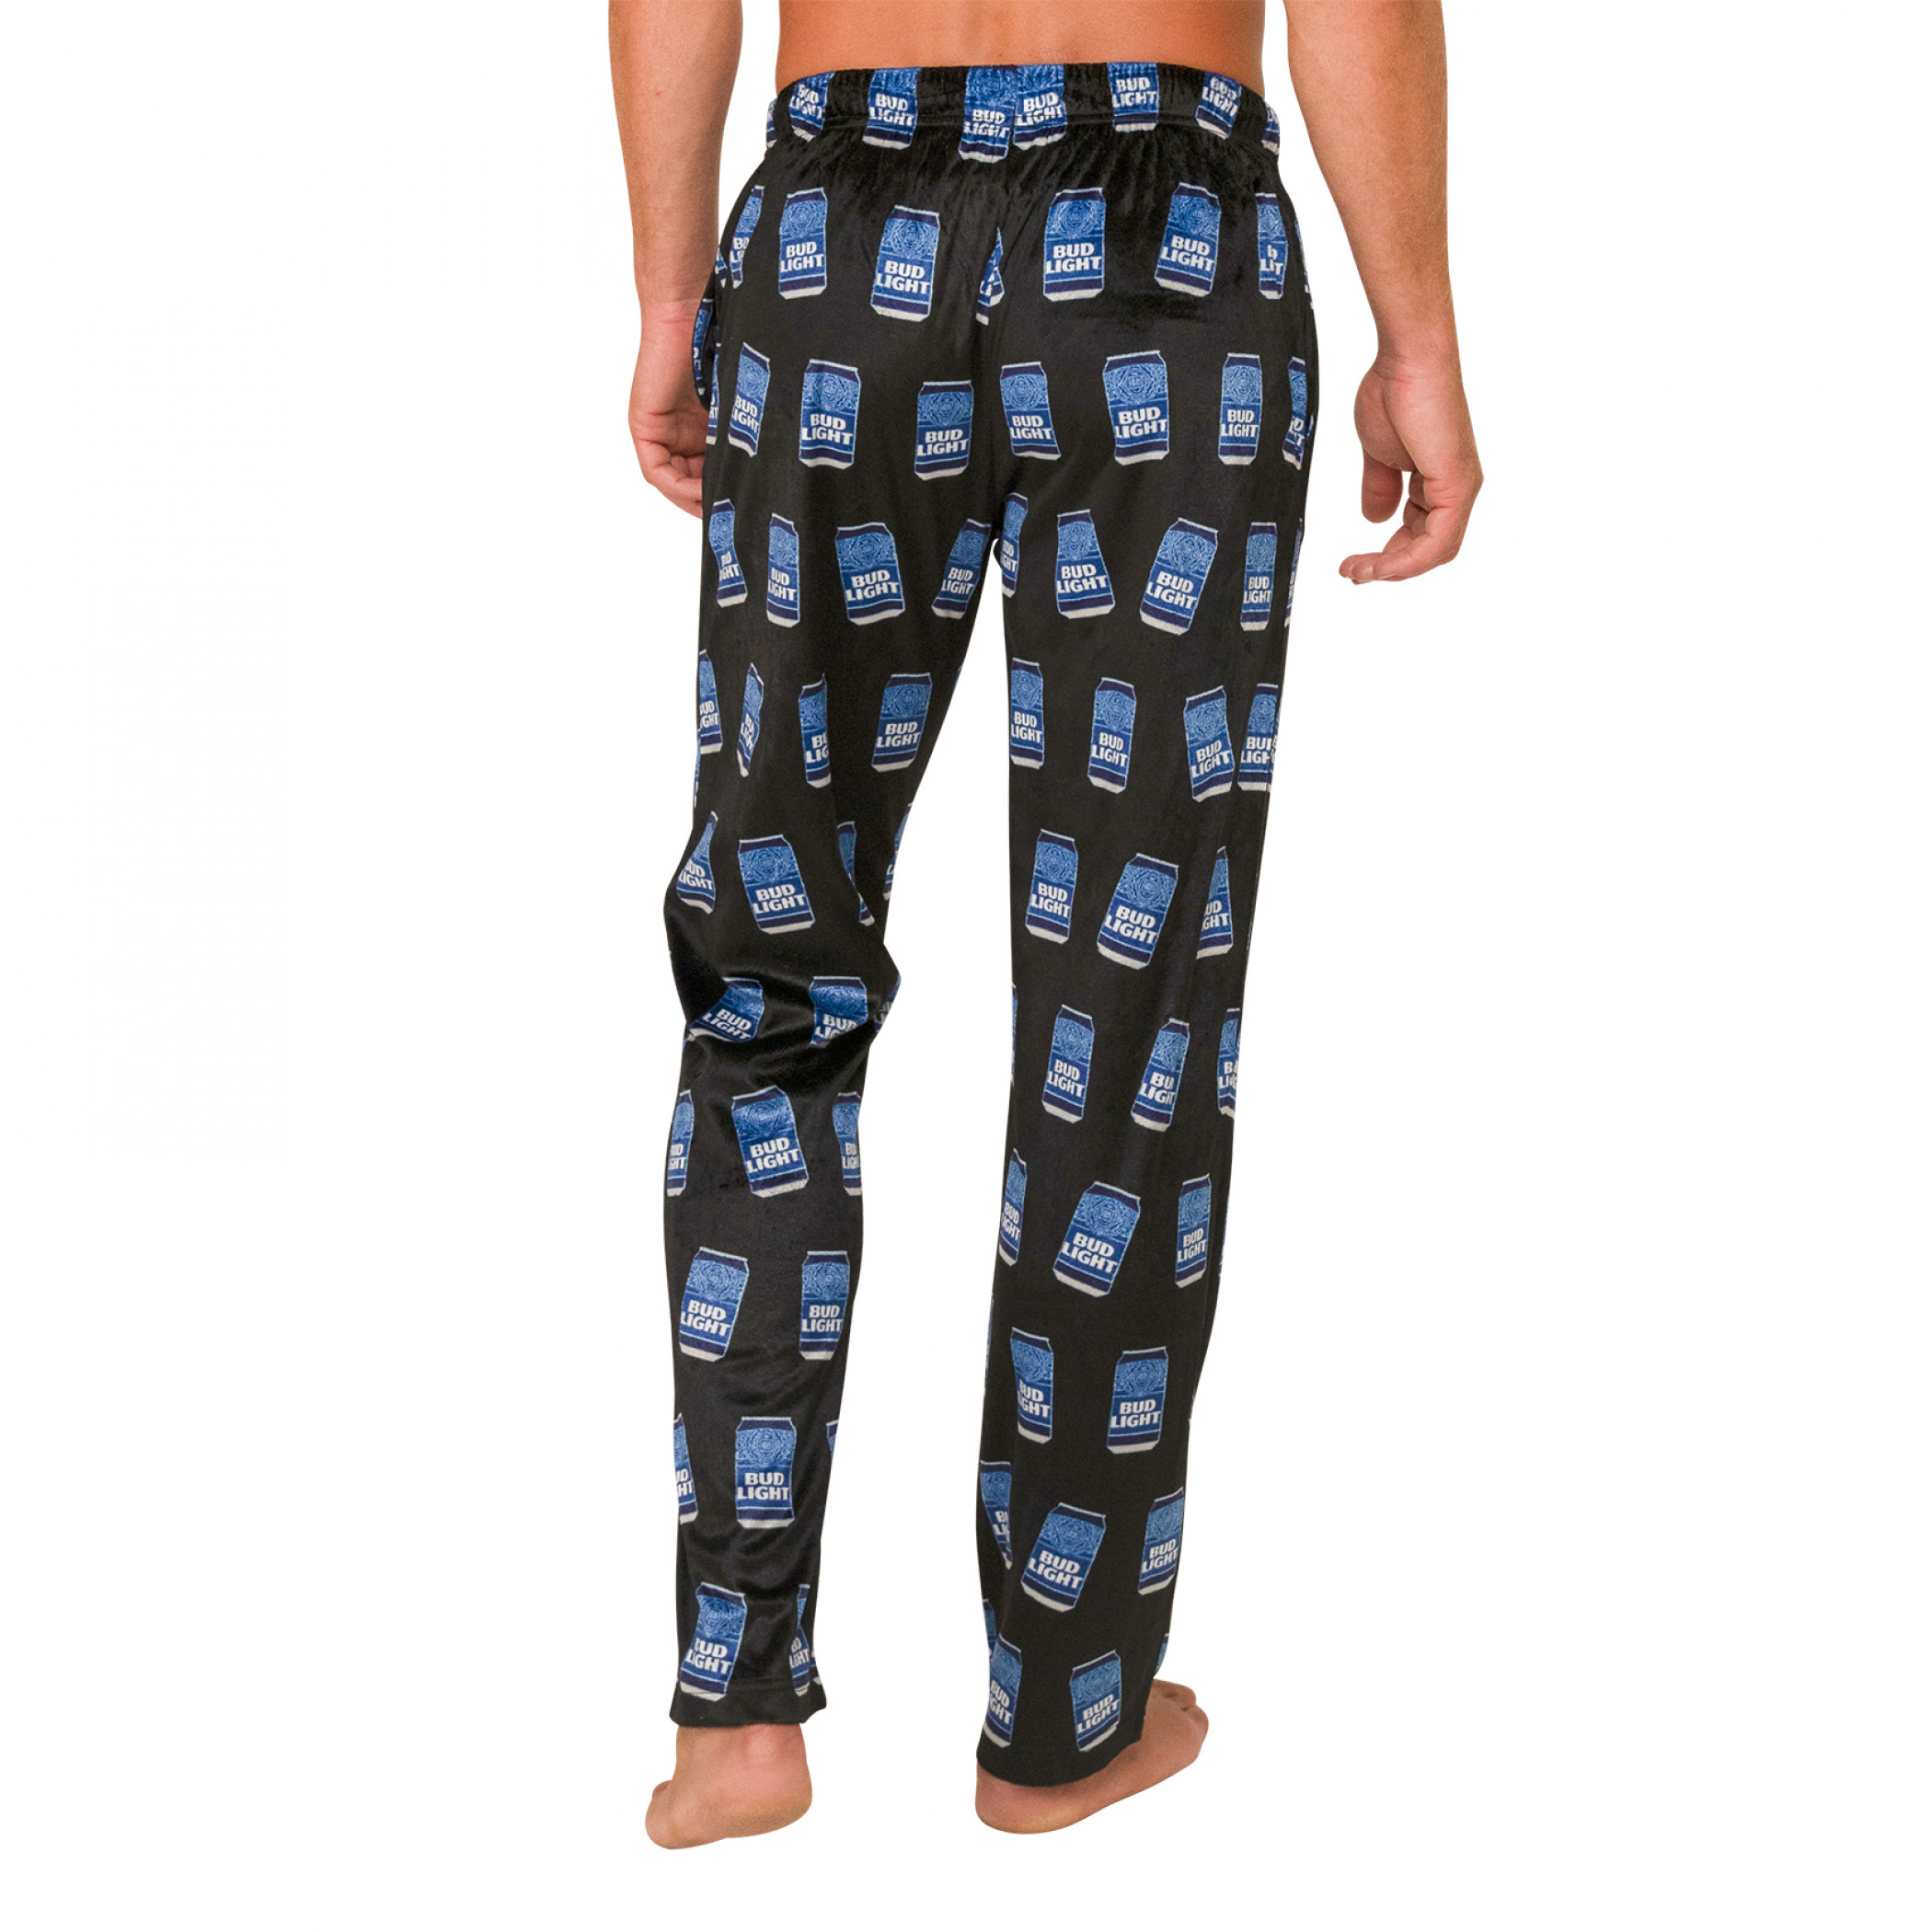 Crazy Boxers Bud Light Cans Pajama Pants